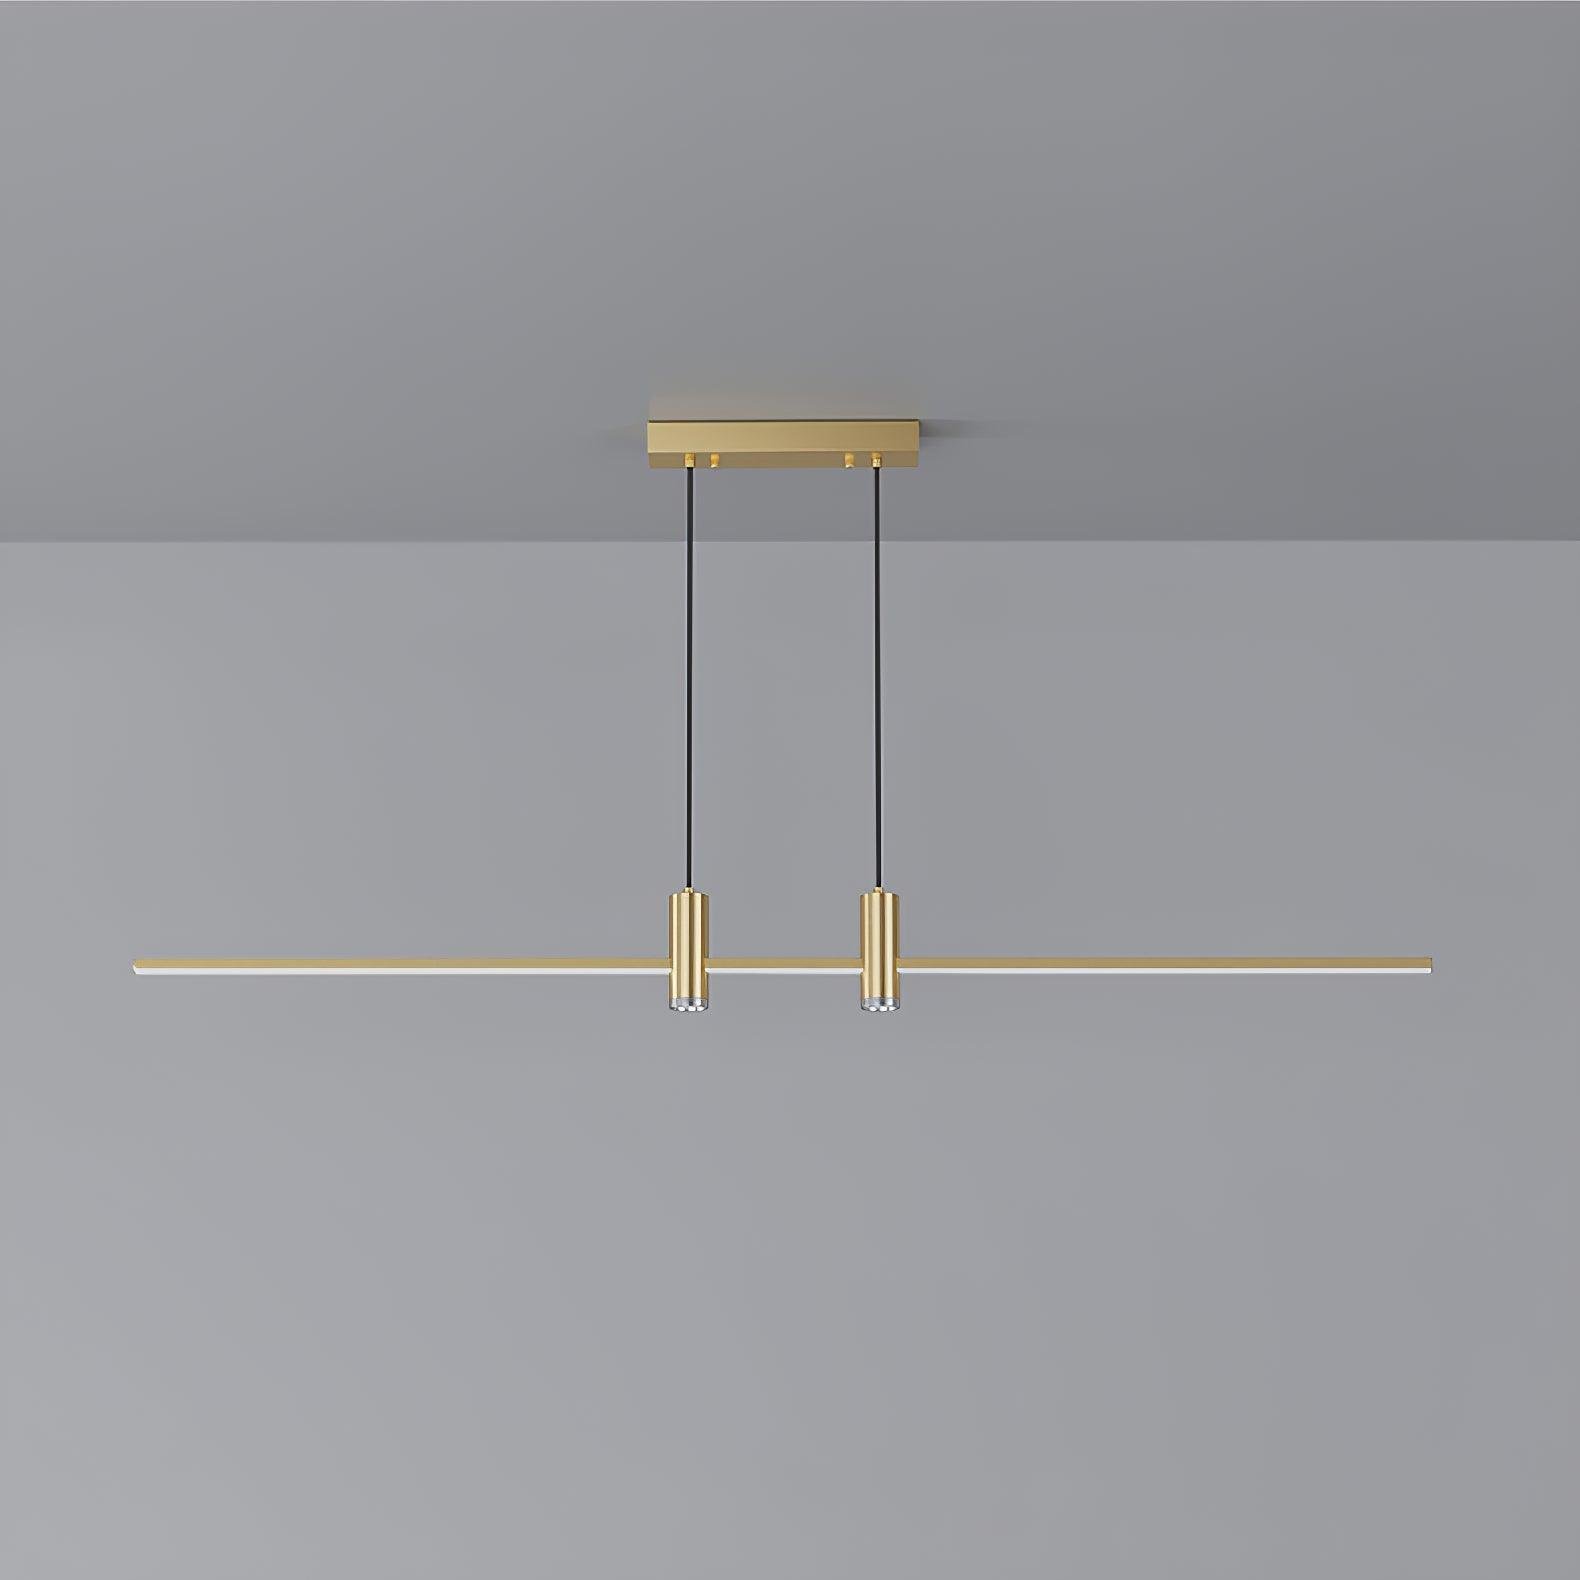 Gold Link Pendant Light Model A: L 39.4″ x H 59″, L 100cm x H 150cm, with Cool Light